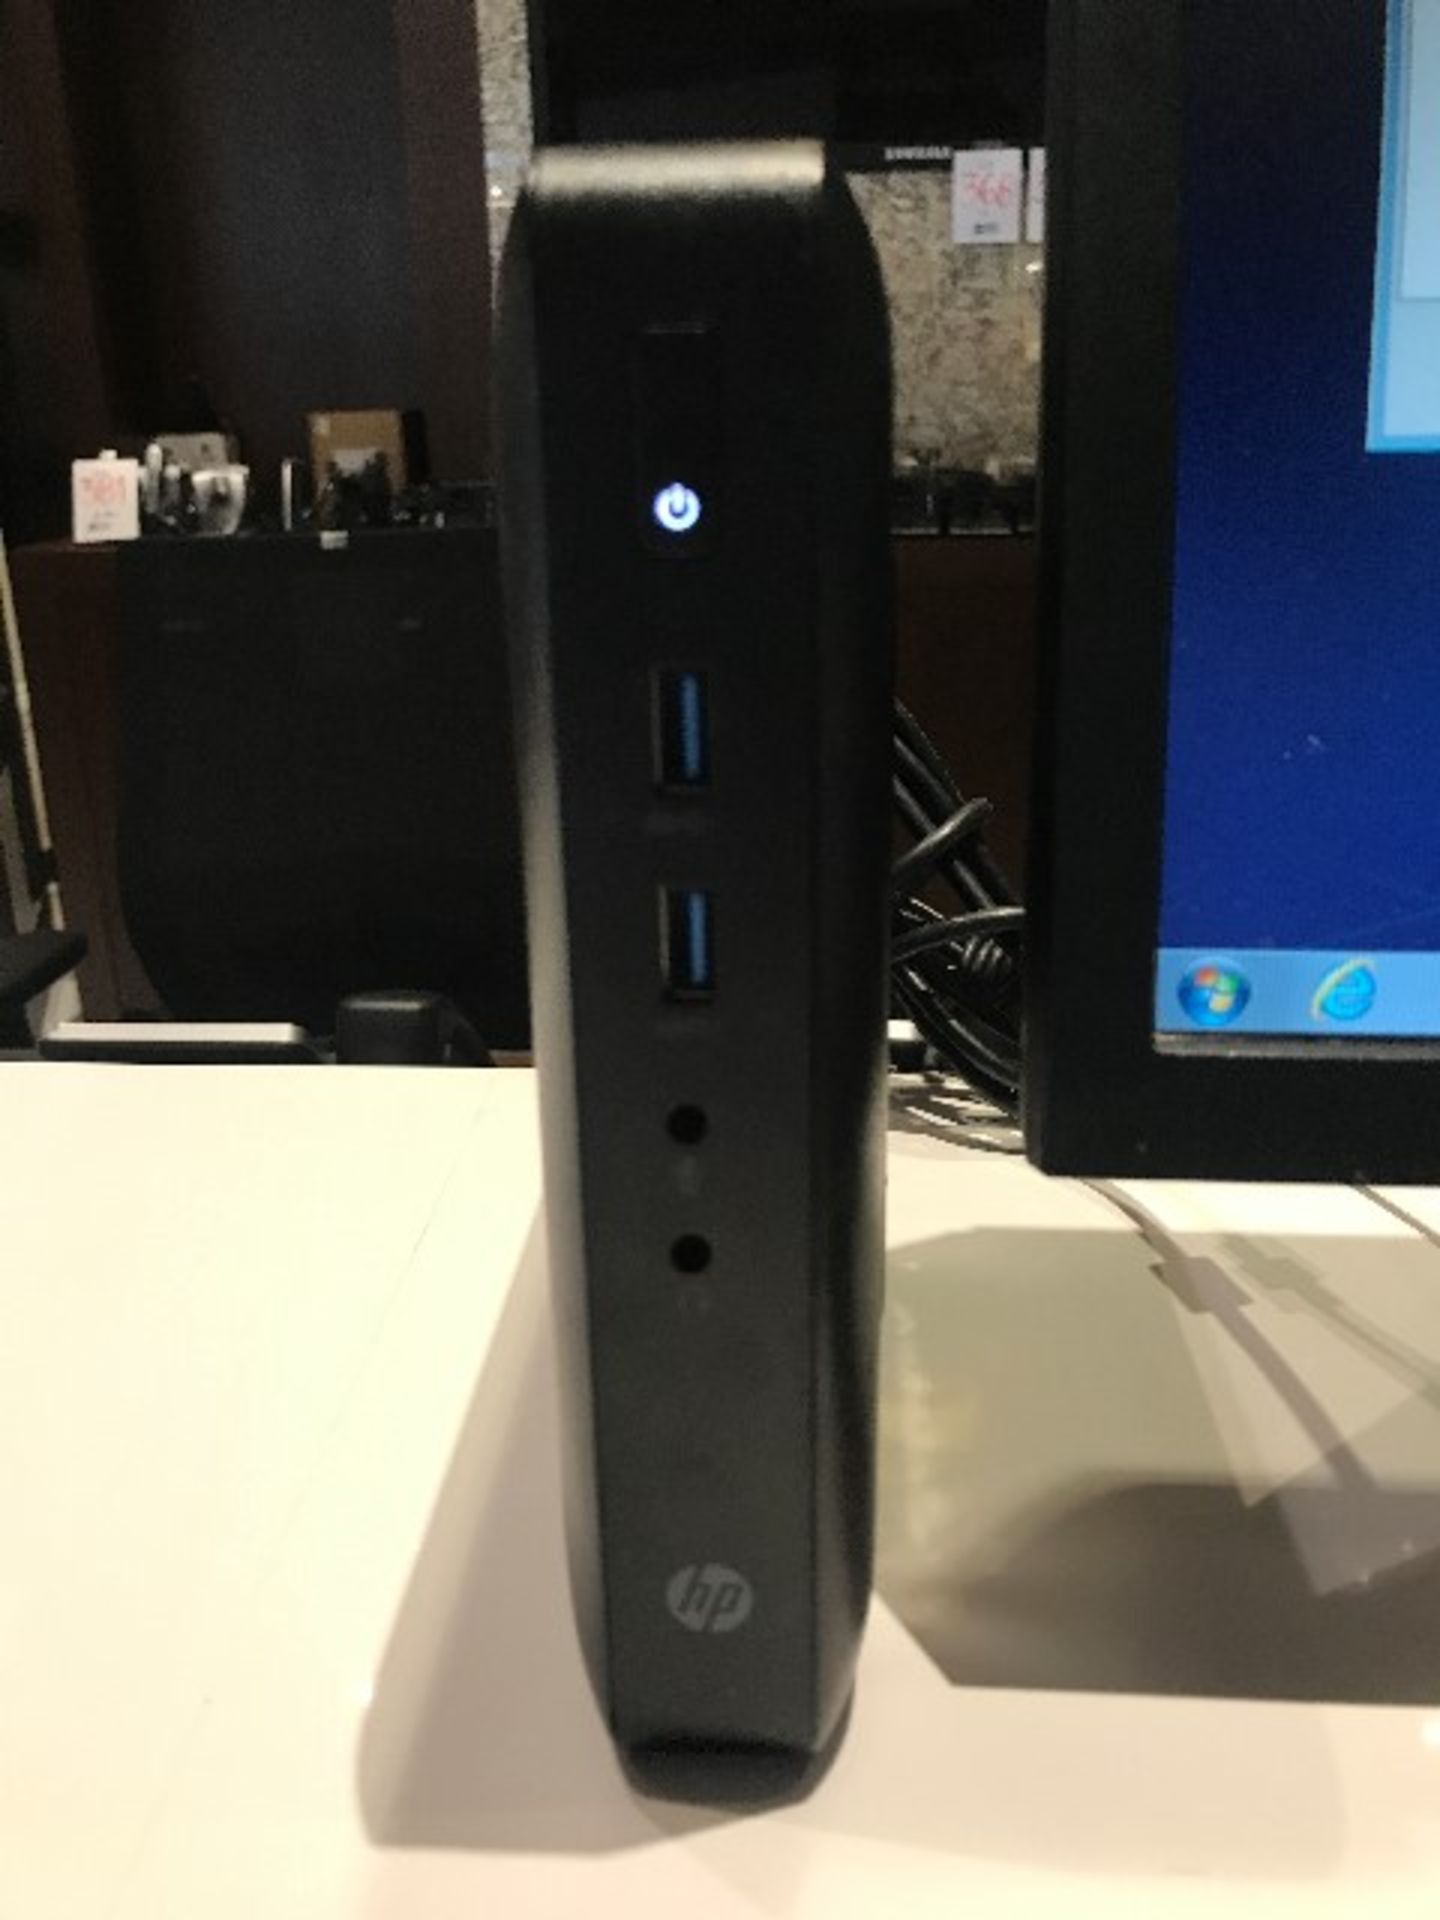 HP AMD THIN,1.2GHz,4GB RAM,126MB Drive,monitor,keyboard,mouse - Image 2 of 3